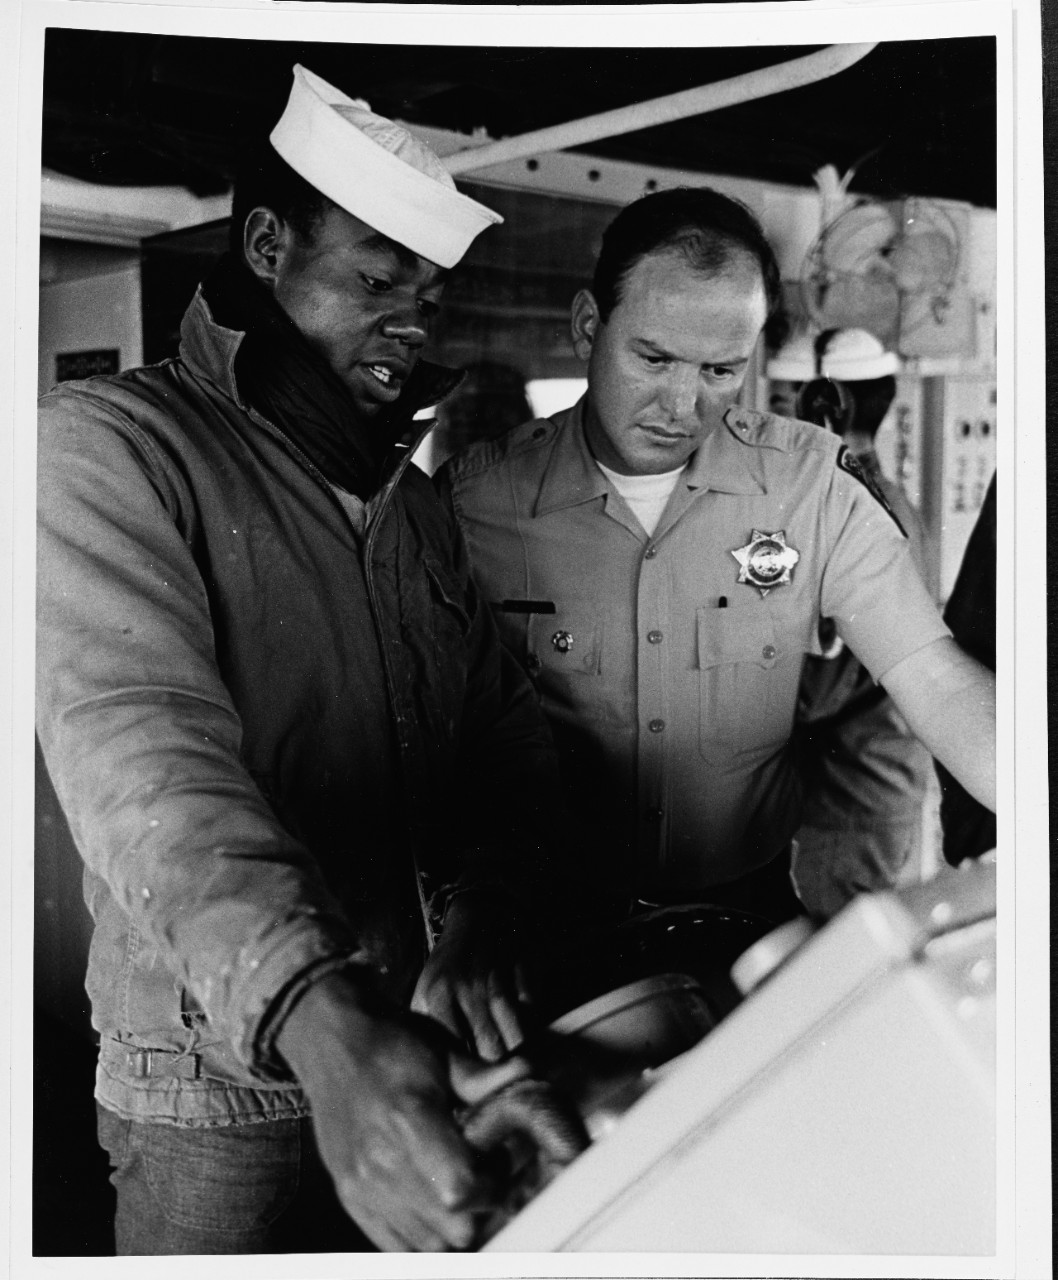 Seaman aboard the USS BRONSTEIN (DE-1037) teaches seagoing "rules of the road."